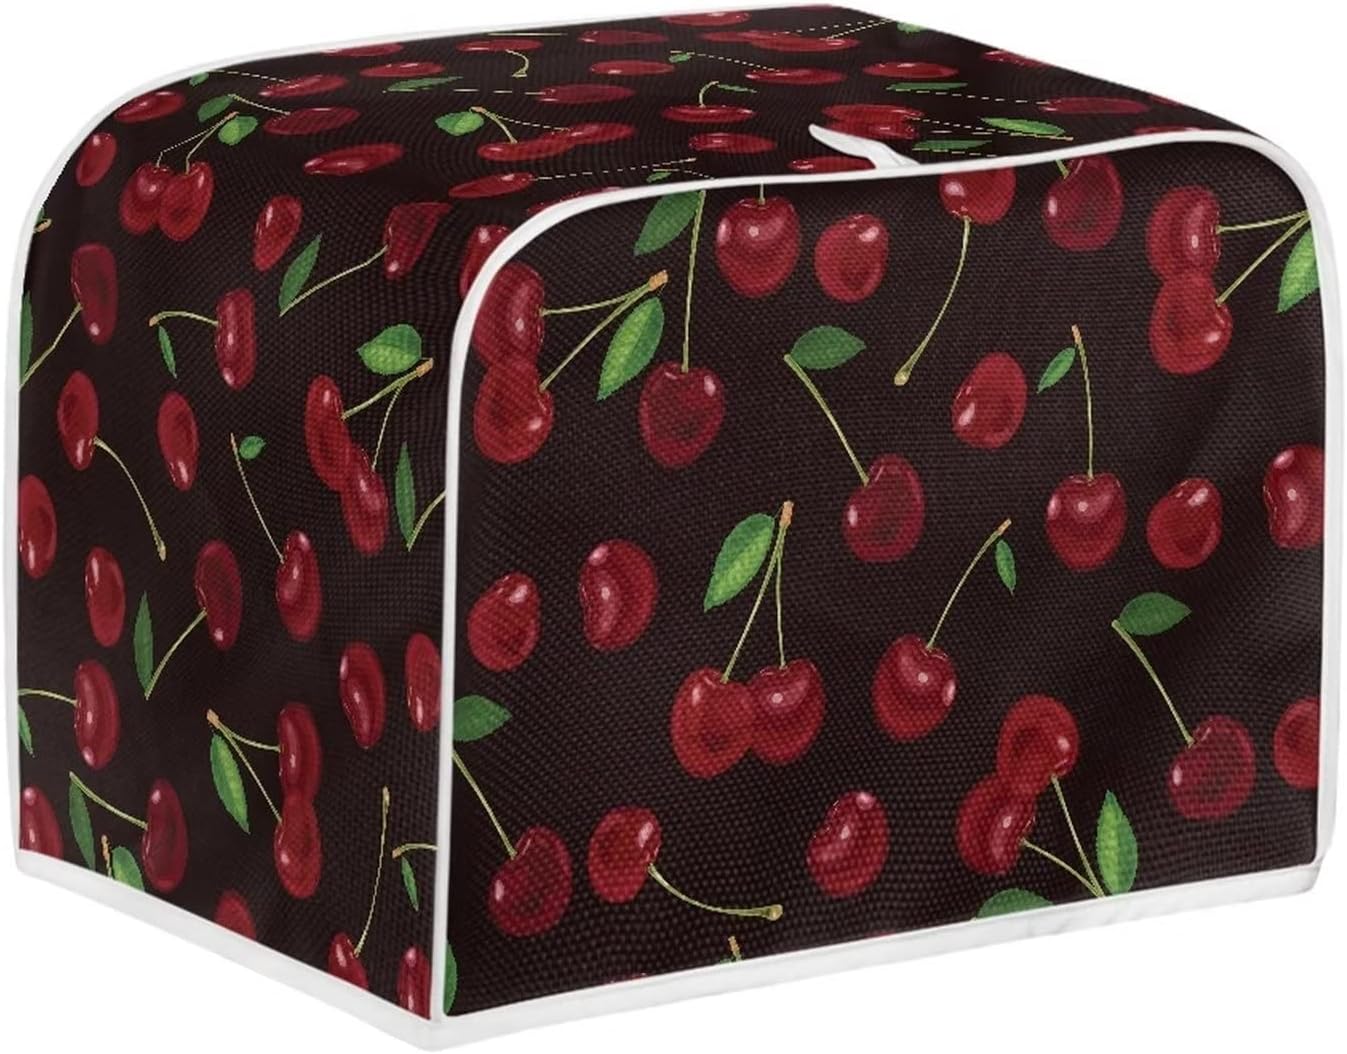 STUOARTE Mushroom Toaster Cover 2 Slice,Kitchen Accessories Toaster Covers Bread Maker Cover,Small Appliance Covers,Microwave Toaster Oven Cover for Most Standard 2 Slice Toasters - Amazing Gadgets Outlet